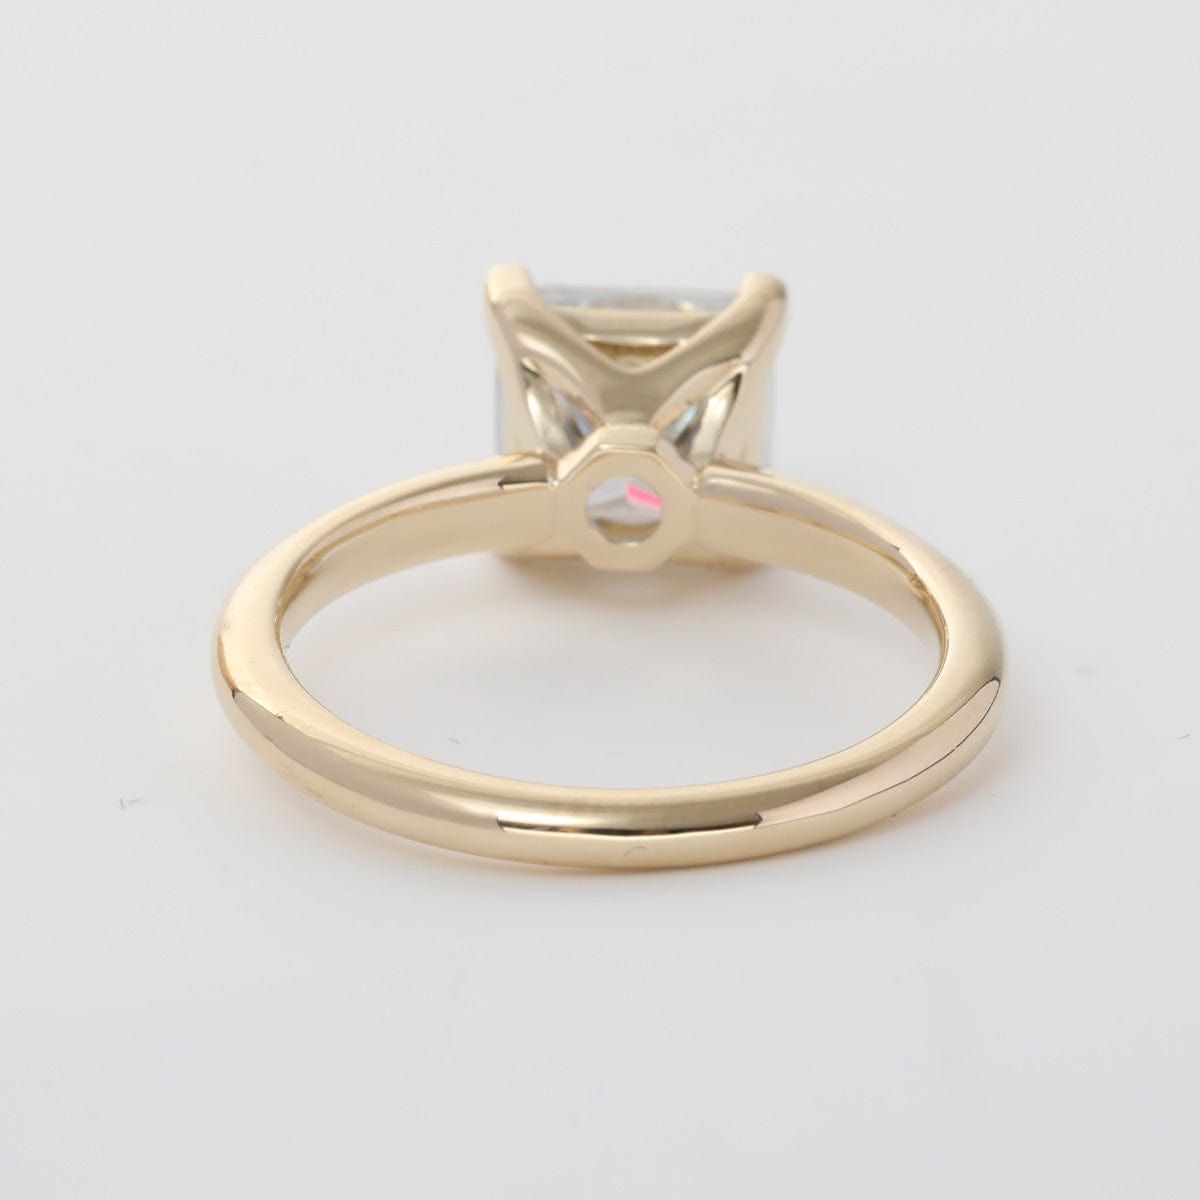 18K Yellow Gold Princess Cut Lab Diamond Solitaire Ring (Ring Setting Only)